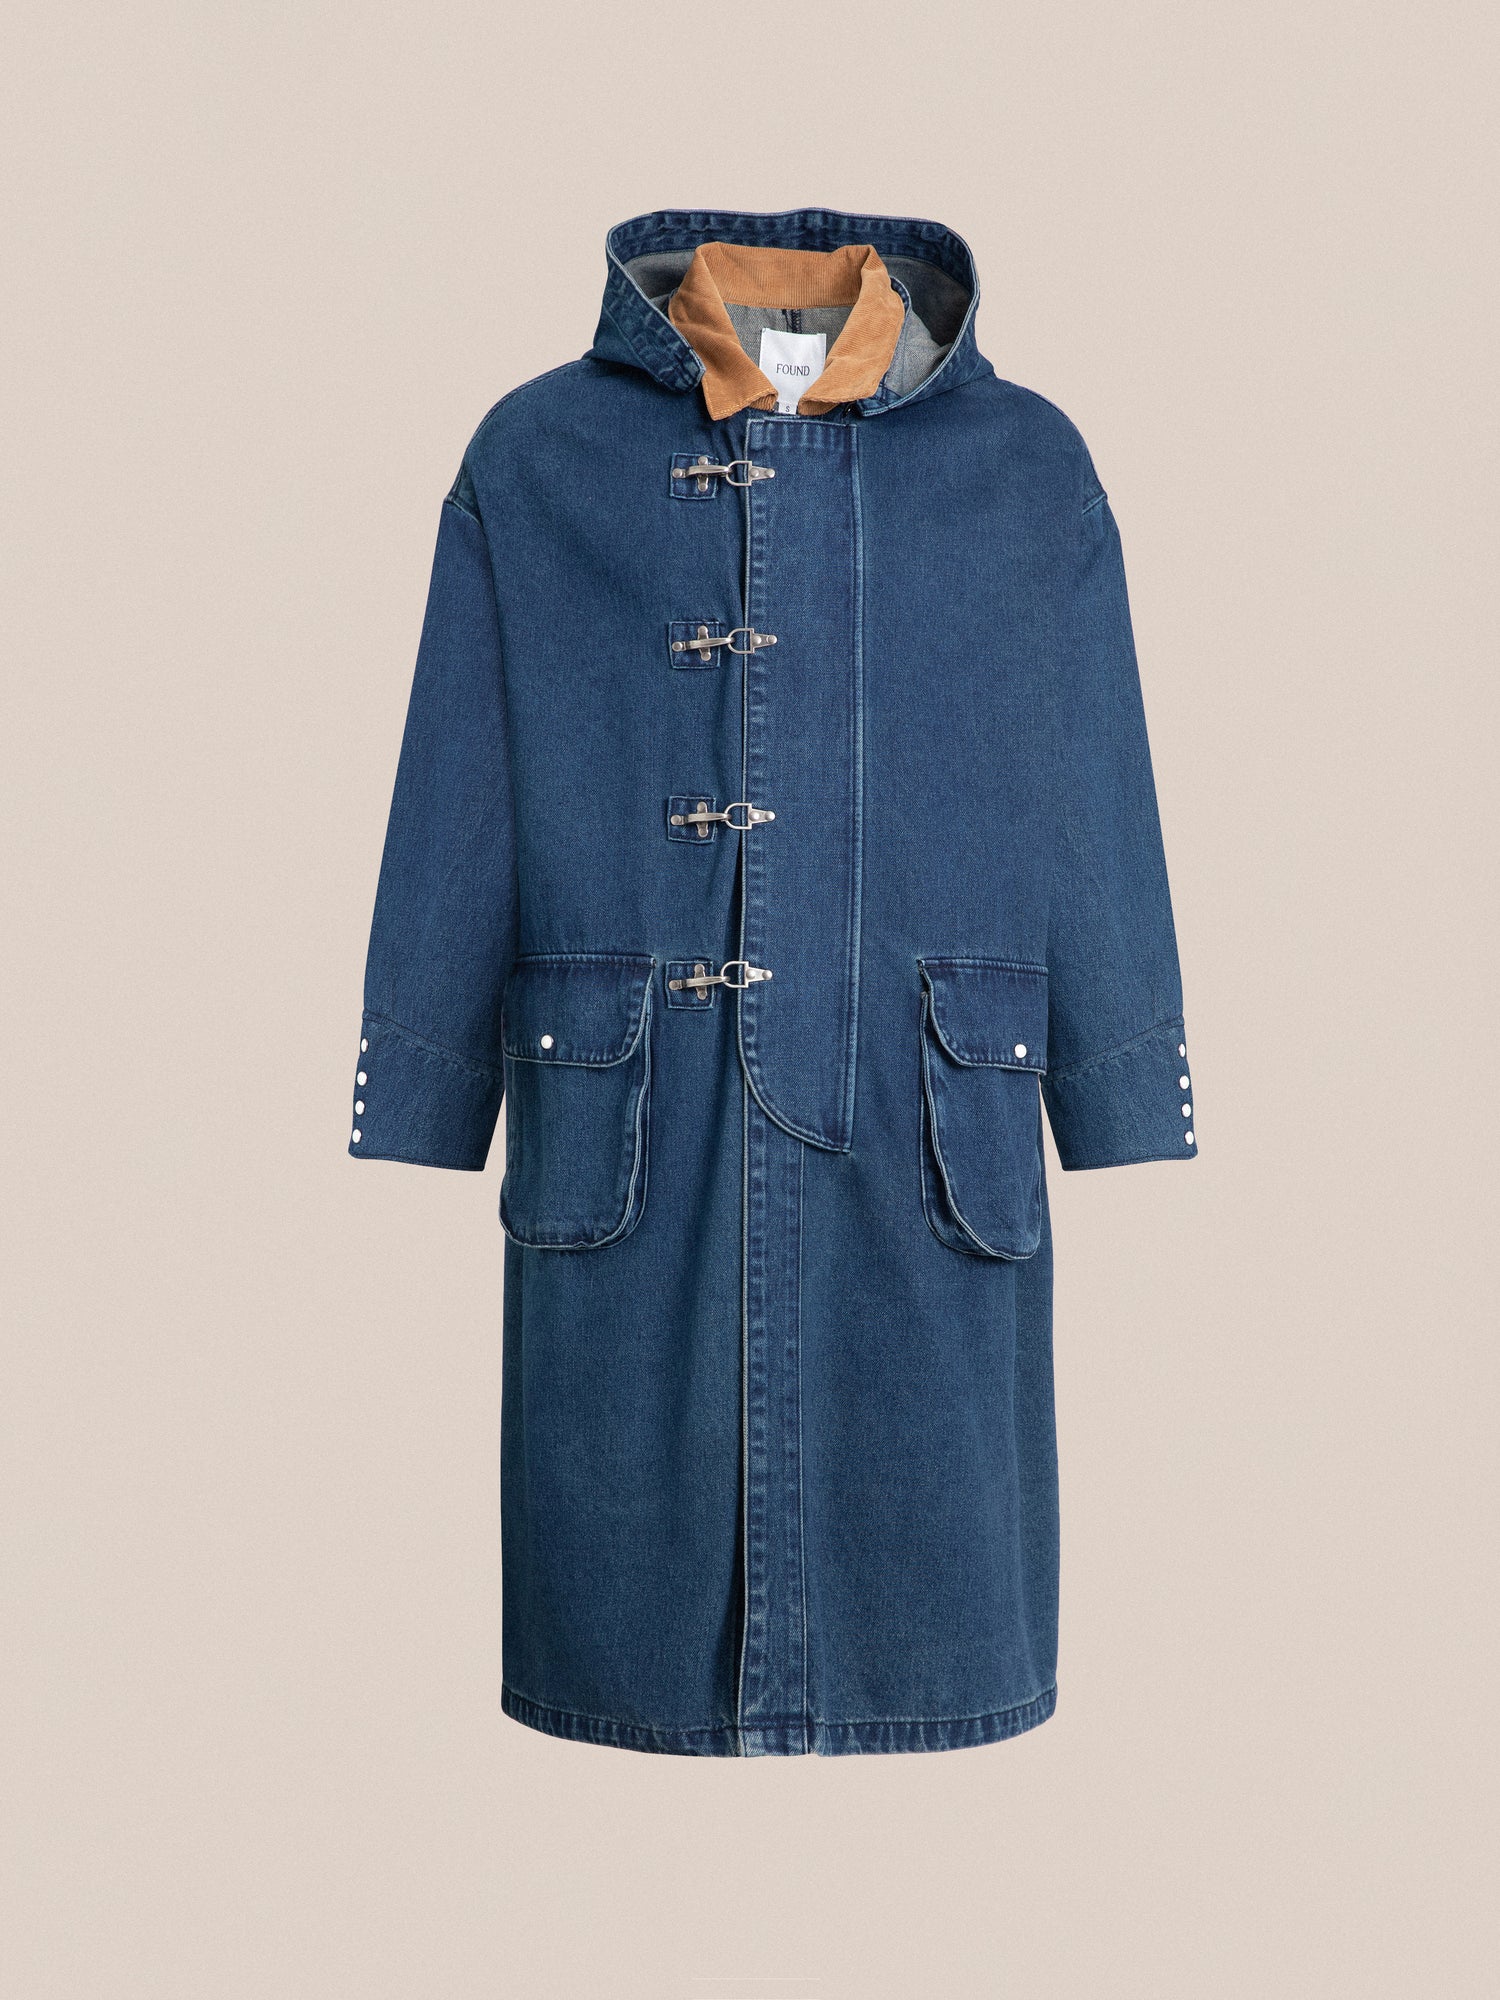 A Sargasso Denim Buckle Coat with a hood, oversized pockets, and a hooded hood by Found.